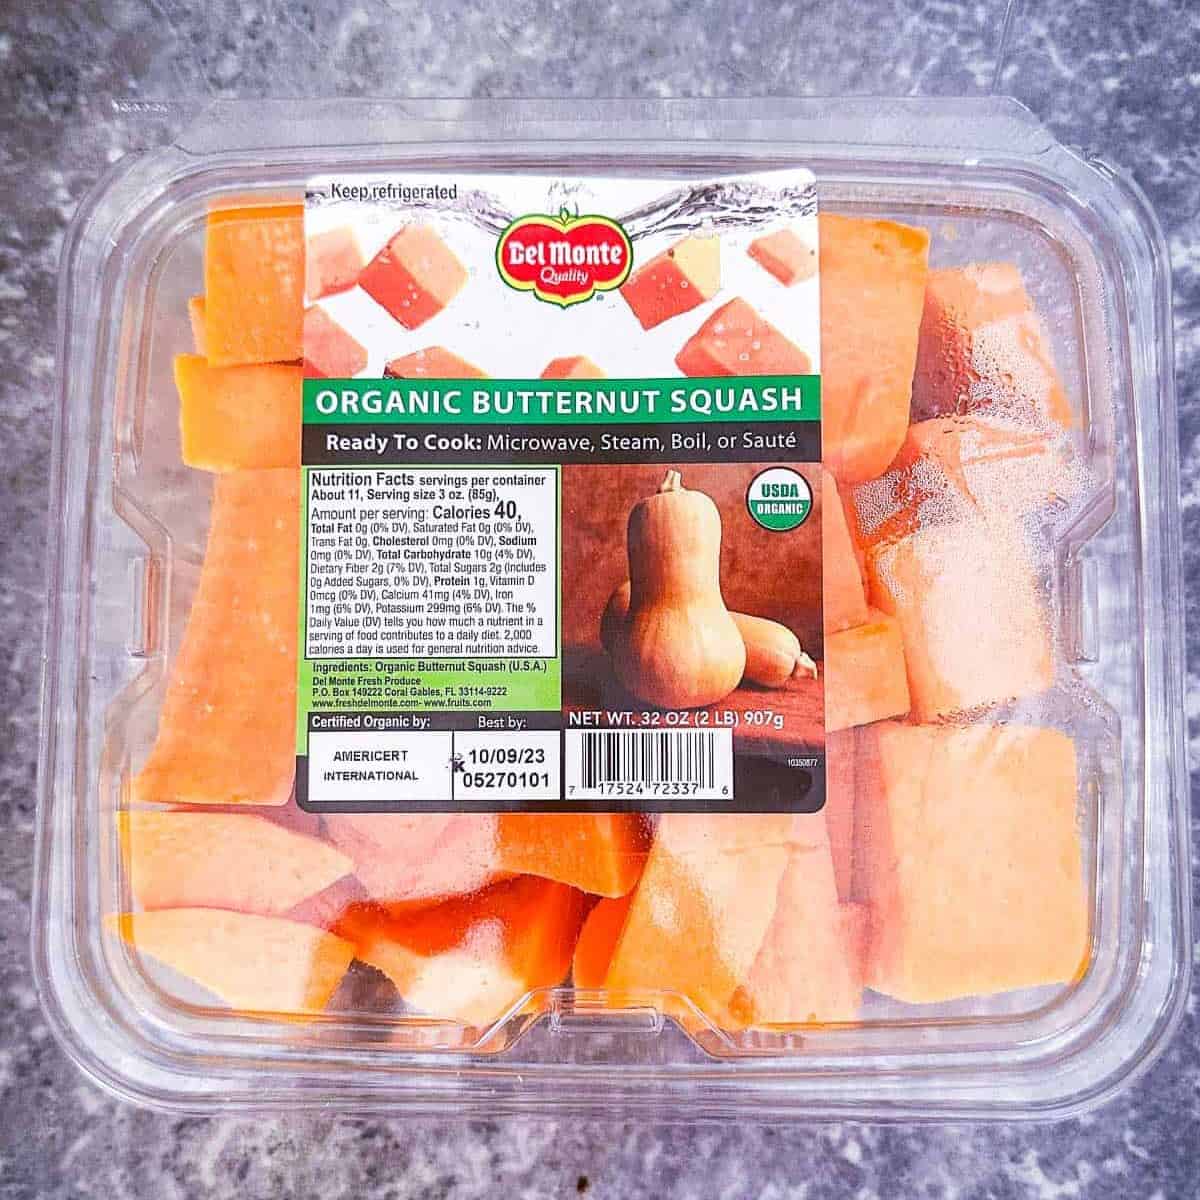 Packaged butternut squash, peeled and cut from the refrigerated Costco produce section. 